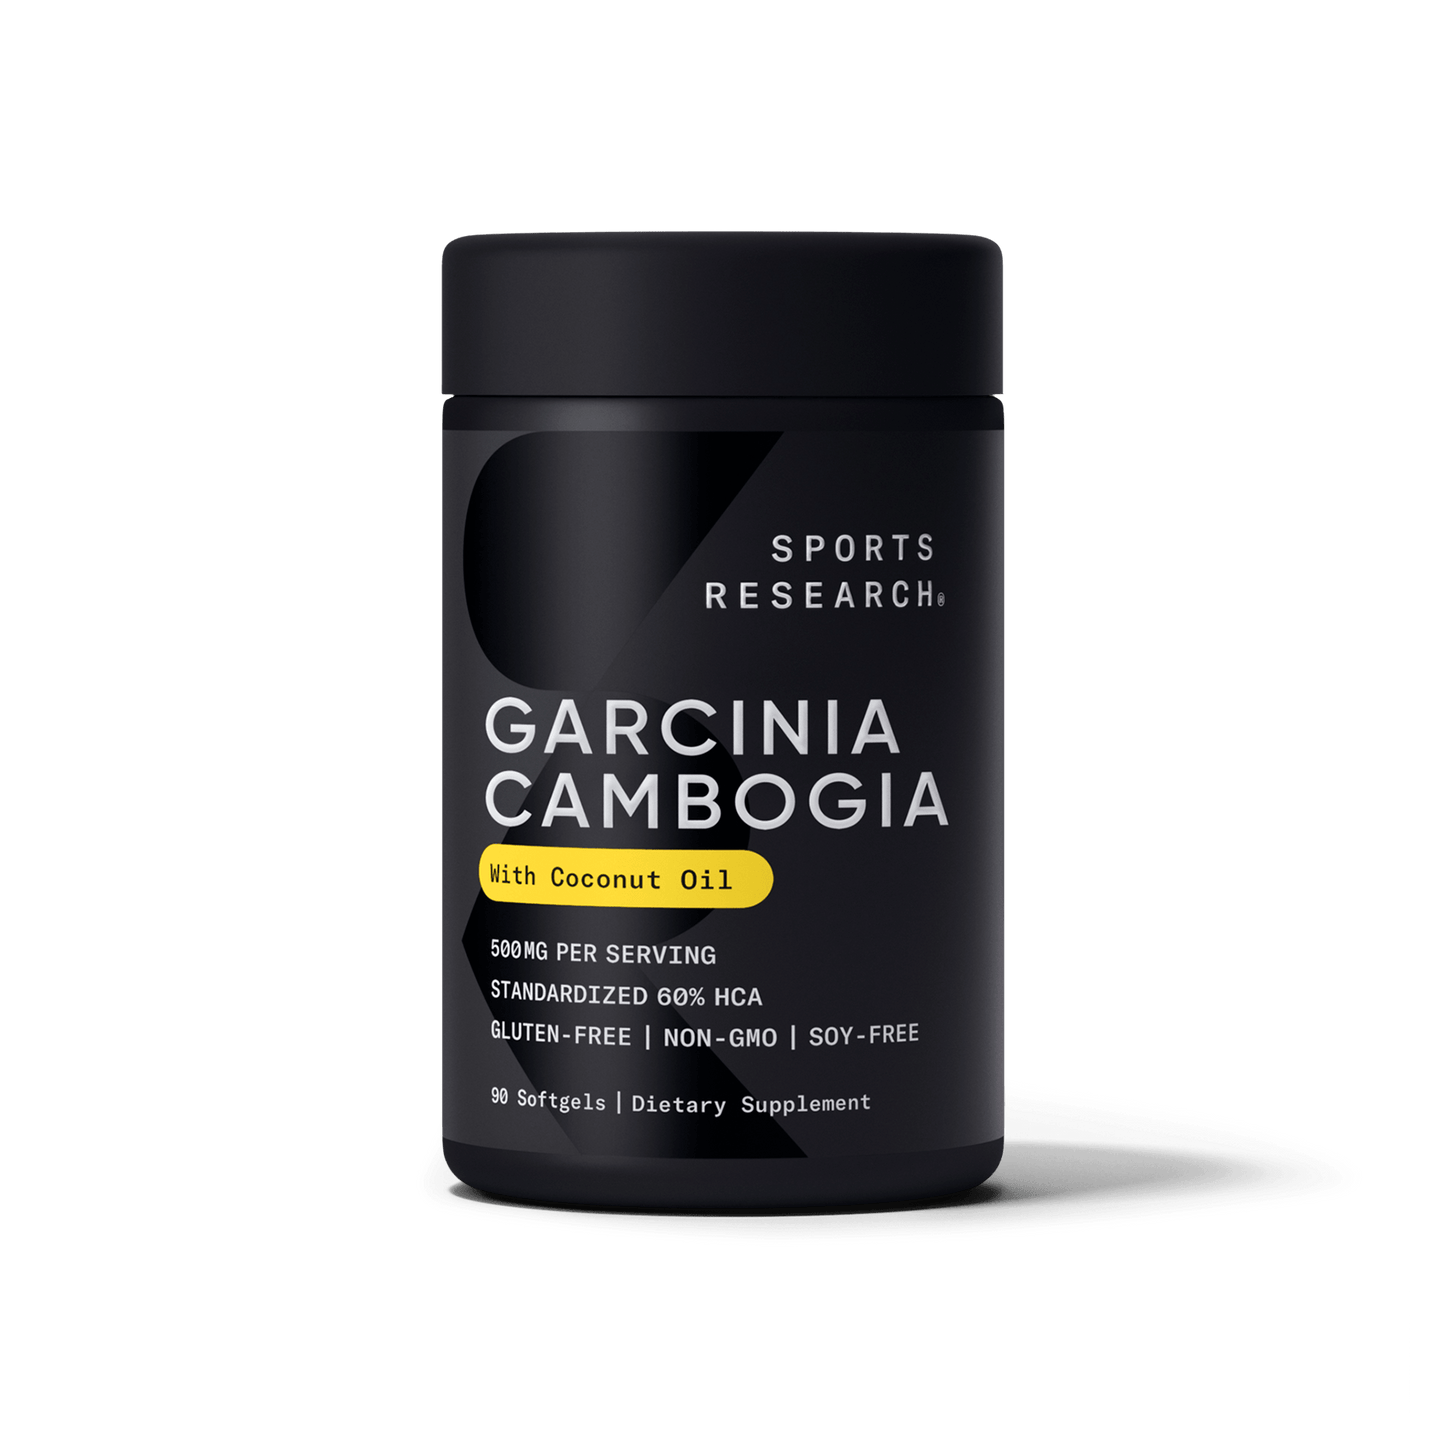 Sports Research Garcinia Cambogia with Coconut Oil.